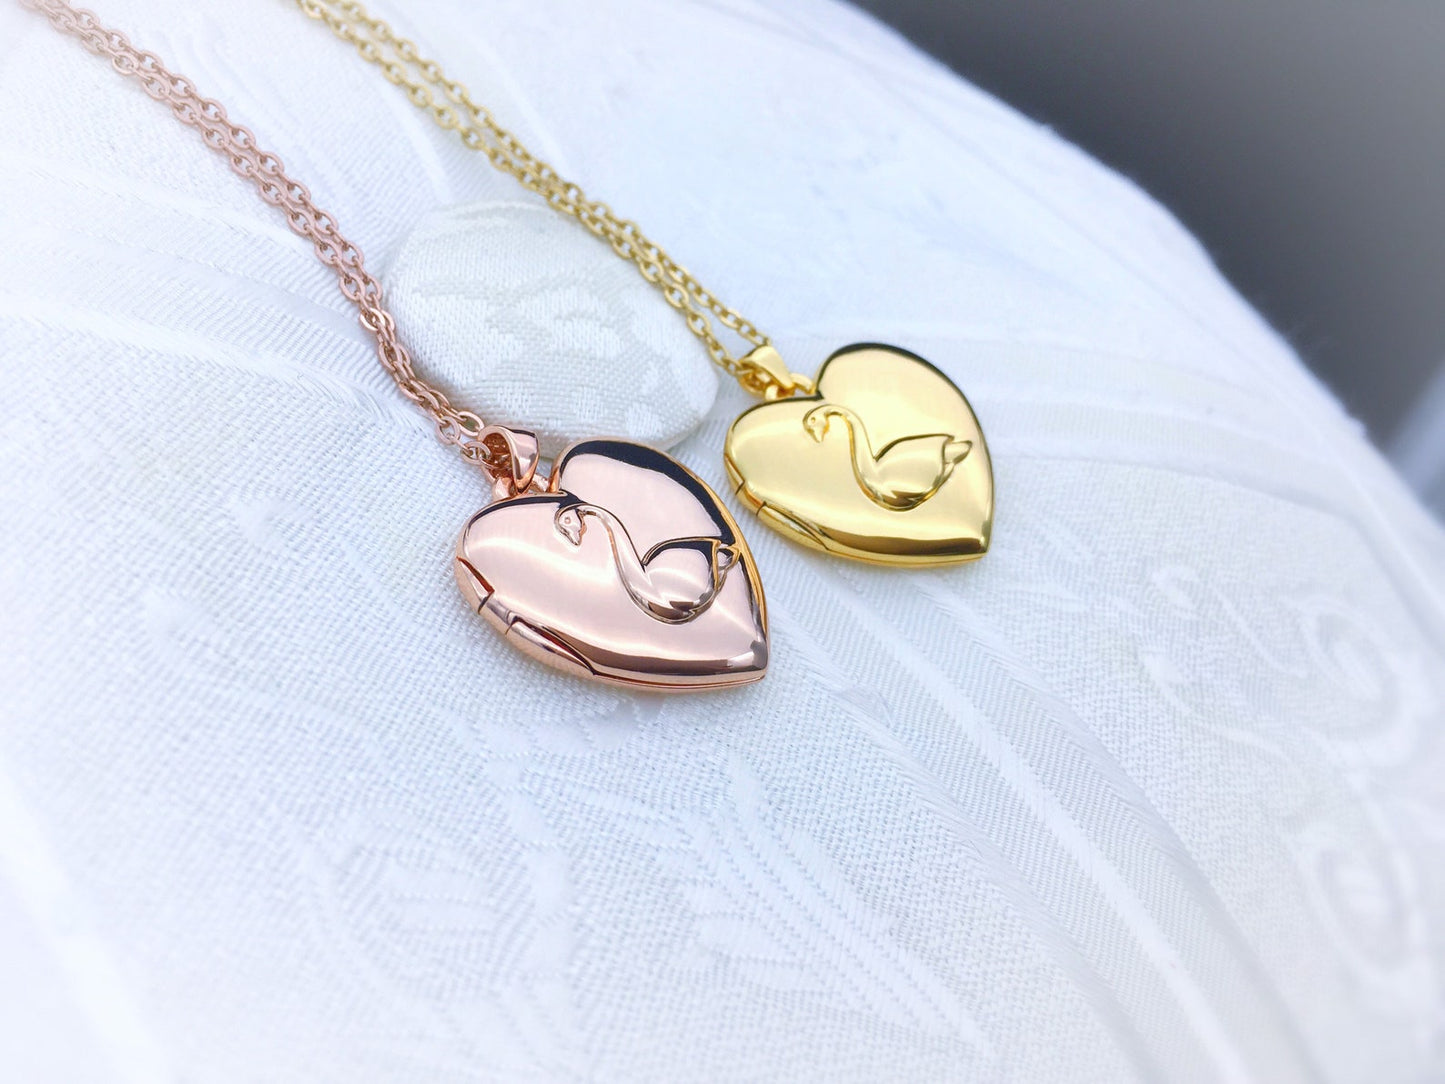 Princess Odette Necklace Openable Heart Pendant Swan The Spell of the Lake Locket Rose Gold Photo Frame